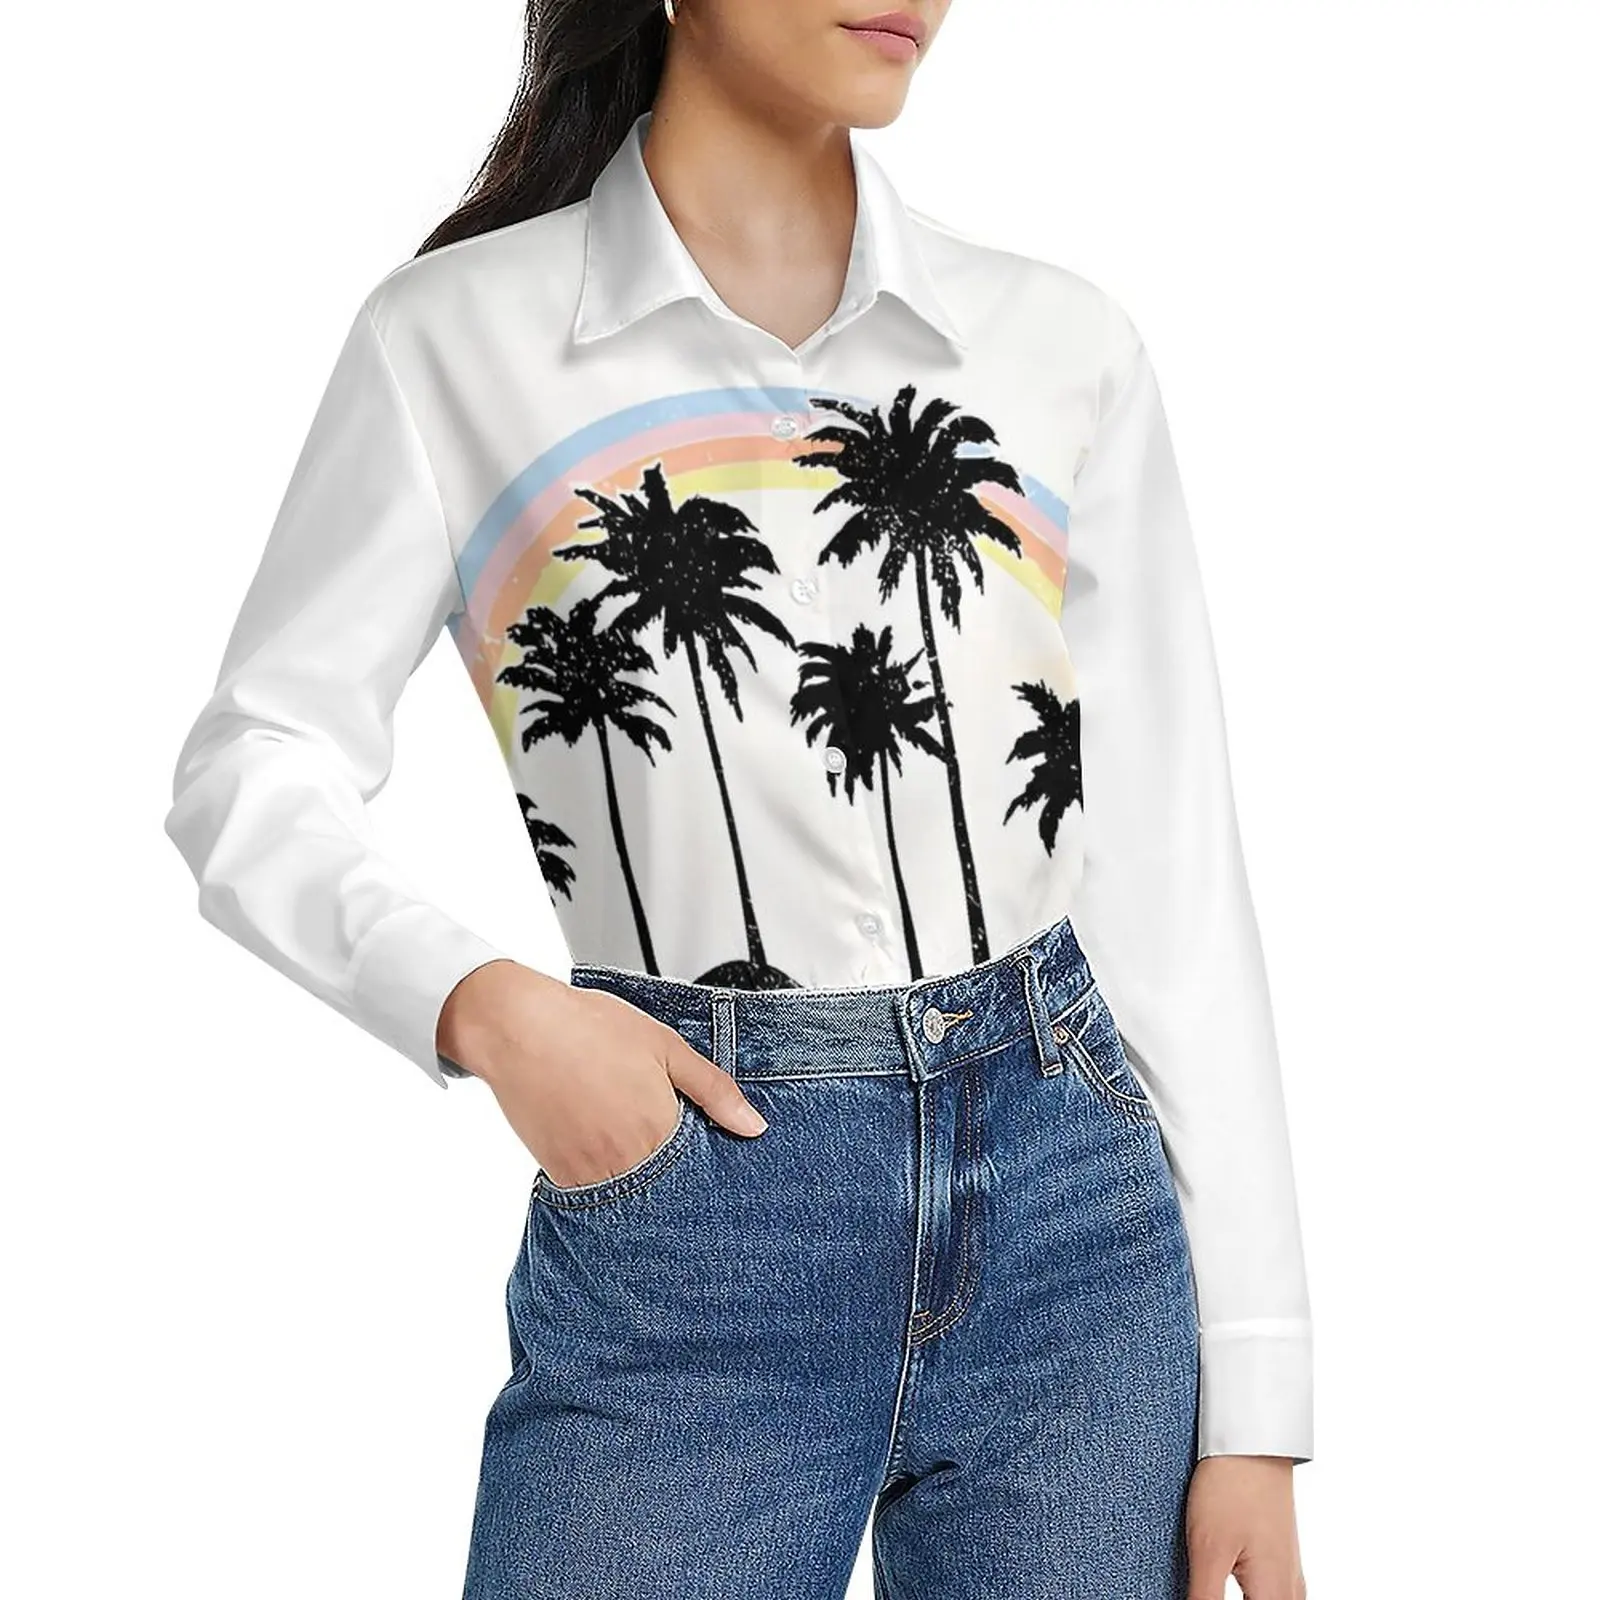 

Tropical Coconut Tree Women's Spring/Summer Long Sleeve Lining Customizable High Quality Shirt Plus Size Fashion Style 2023